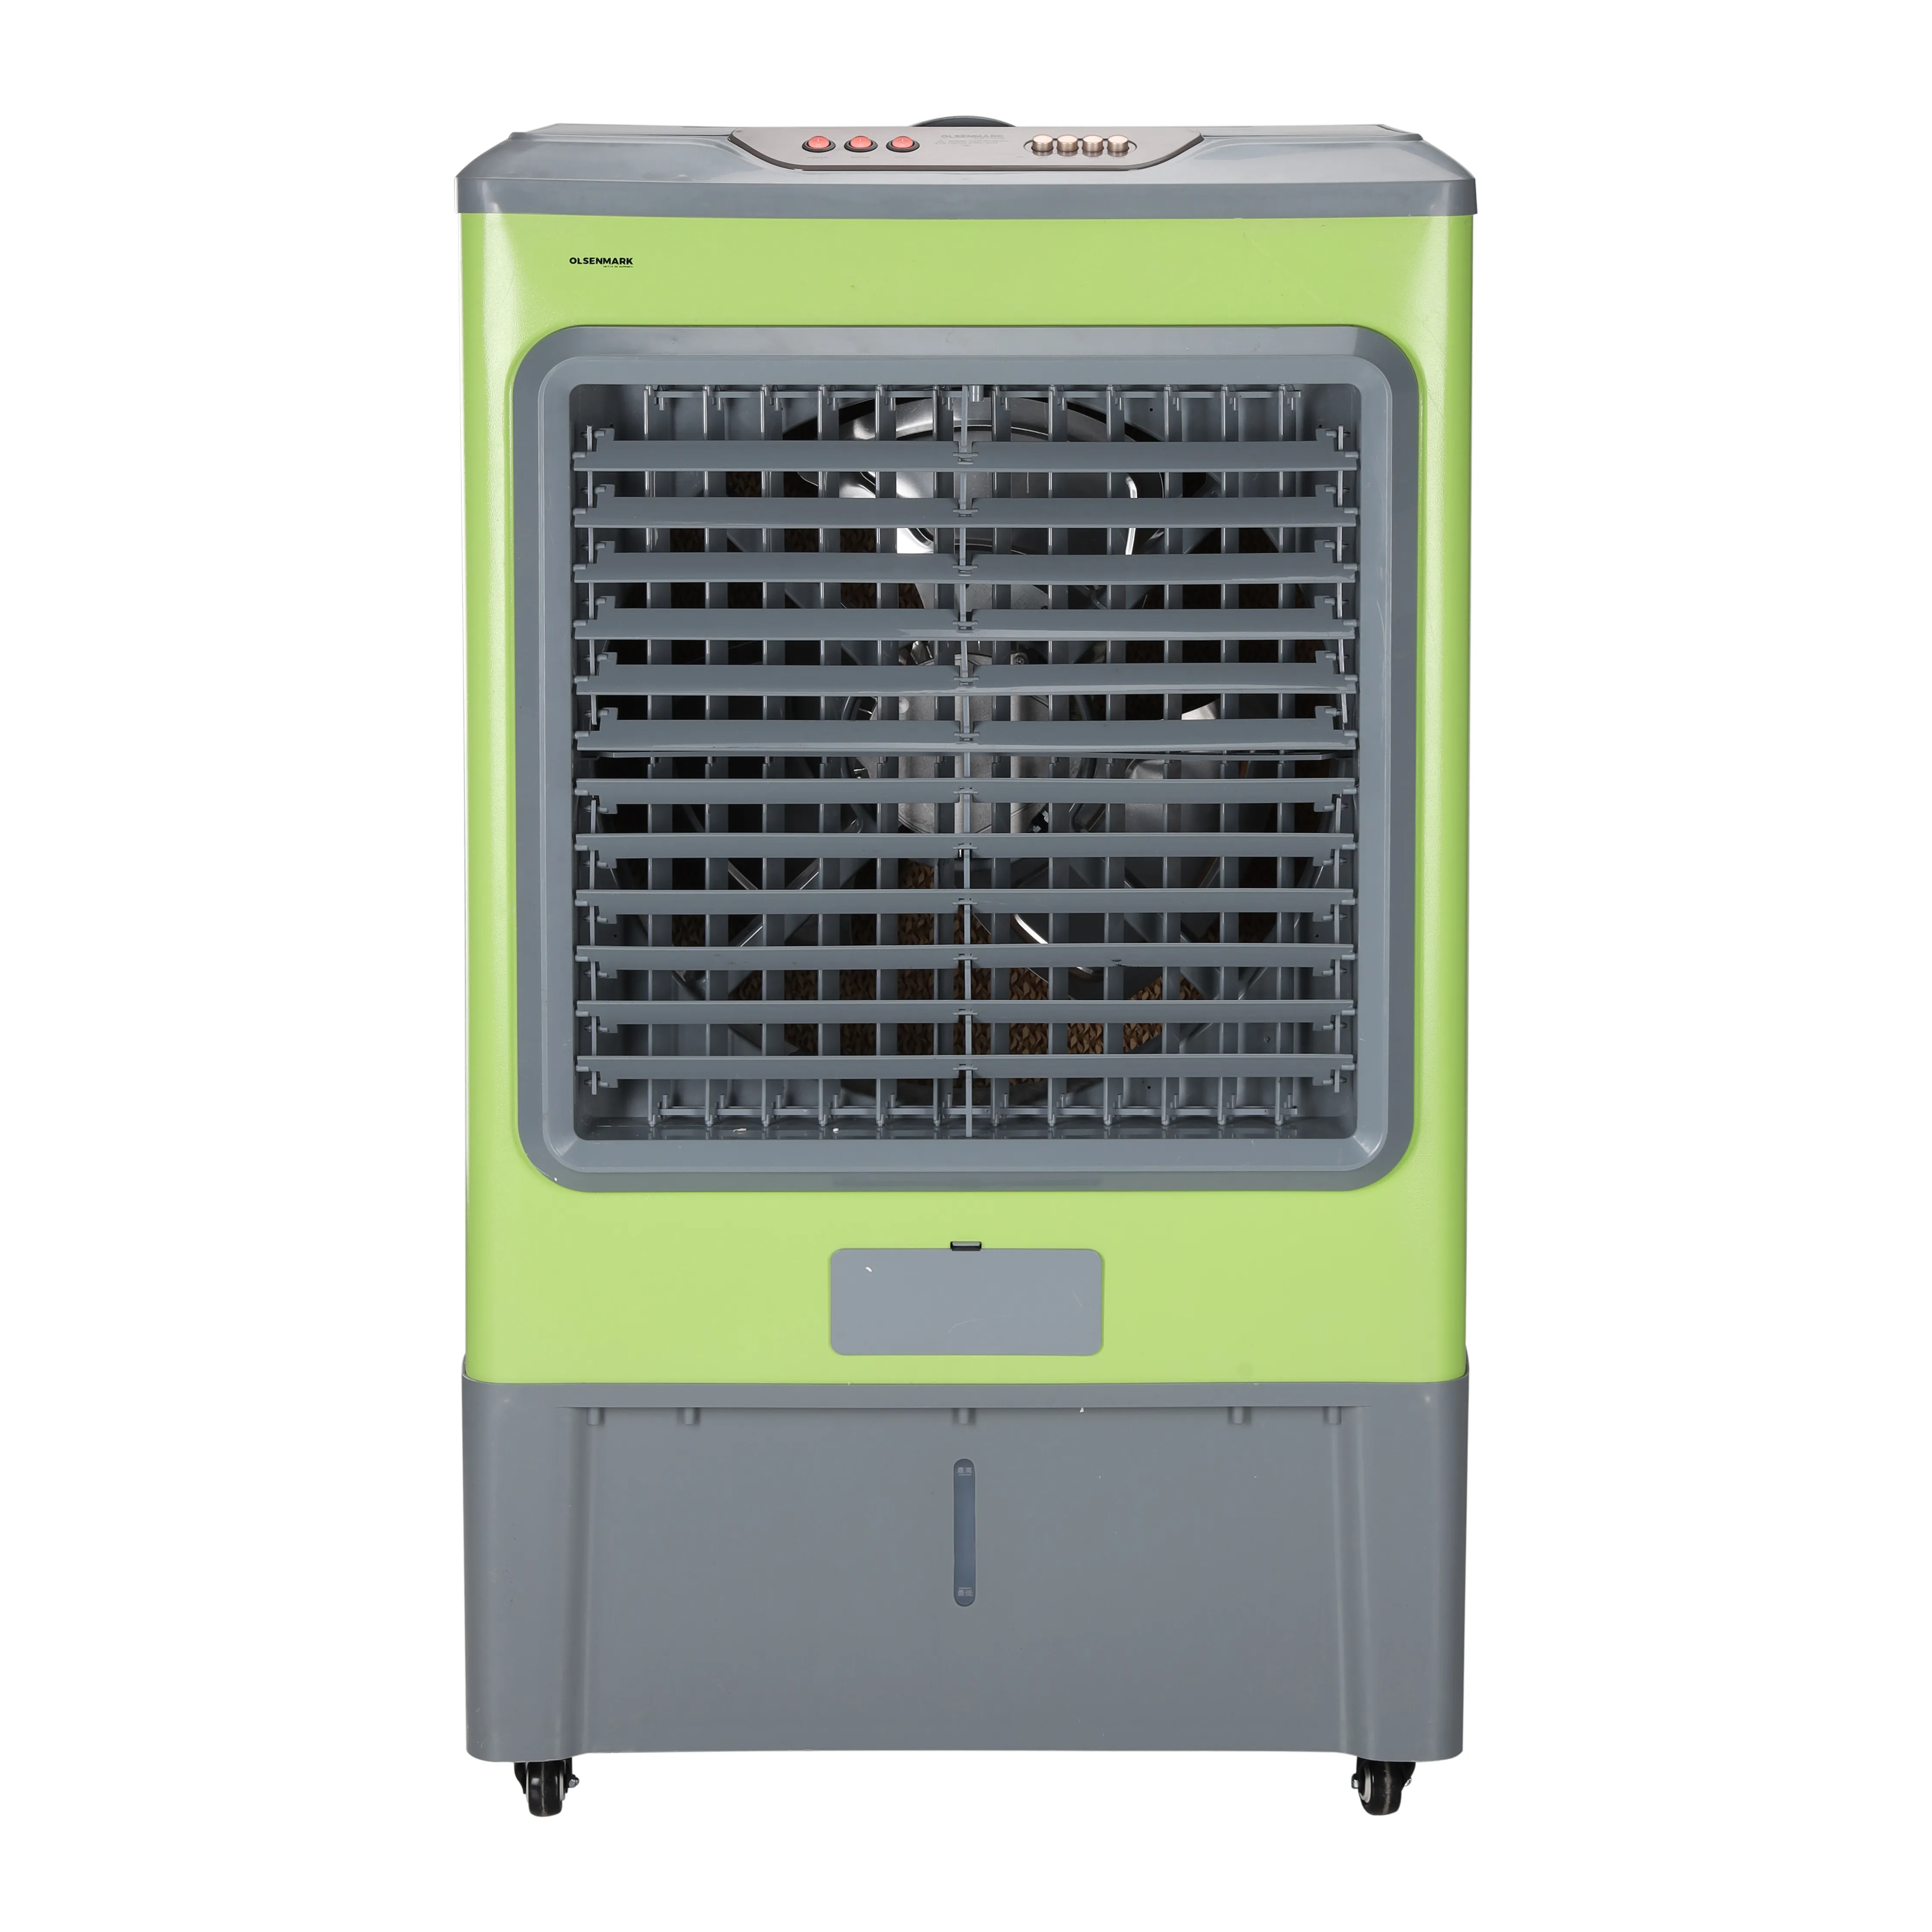 Olsenmark Air Cooler - Portable Lightweight 3-Wind Speed, Modes Portable with Castors Wheels Auto Swing Ideal for Bedroom, Office, Kitchen & More 2 Years Warranty